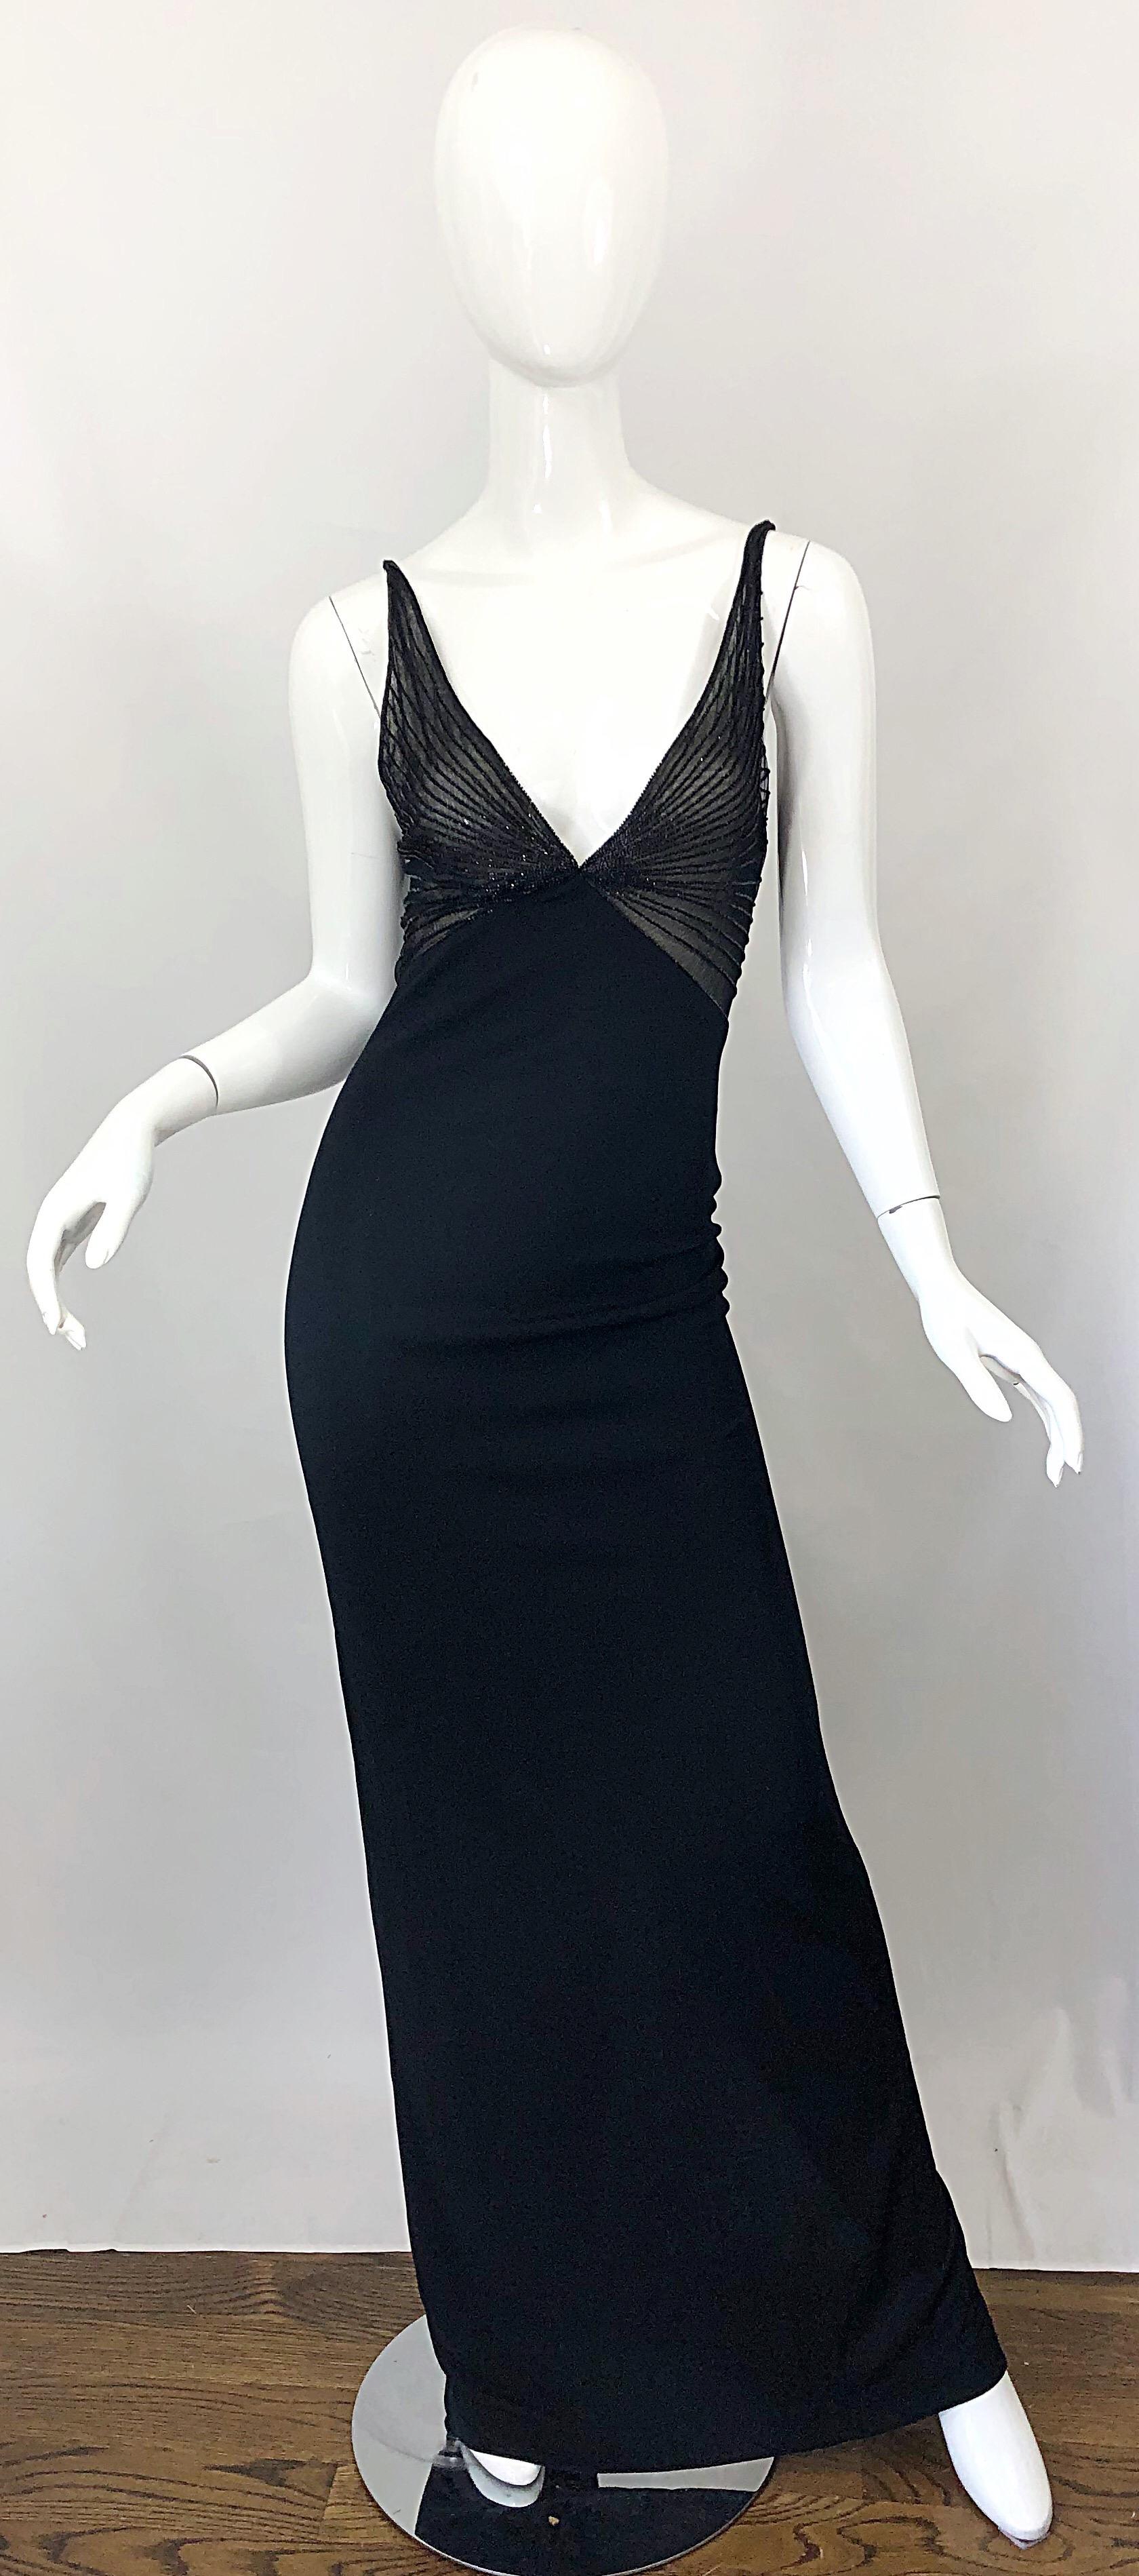 Sexy brand new with tags mid 1990s RANDOLPH DUKE gown! Bodice features multiple layers of silk and tulle. Thousands of hand-sewn seed beads throughout. Retailed got $6,500
In unworn condition, with tags attached 
Marked Size US